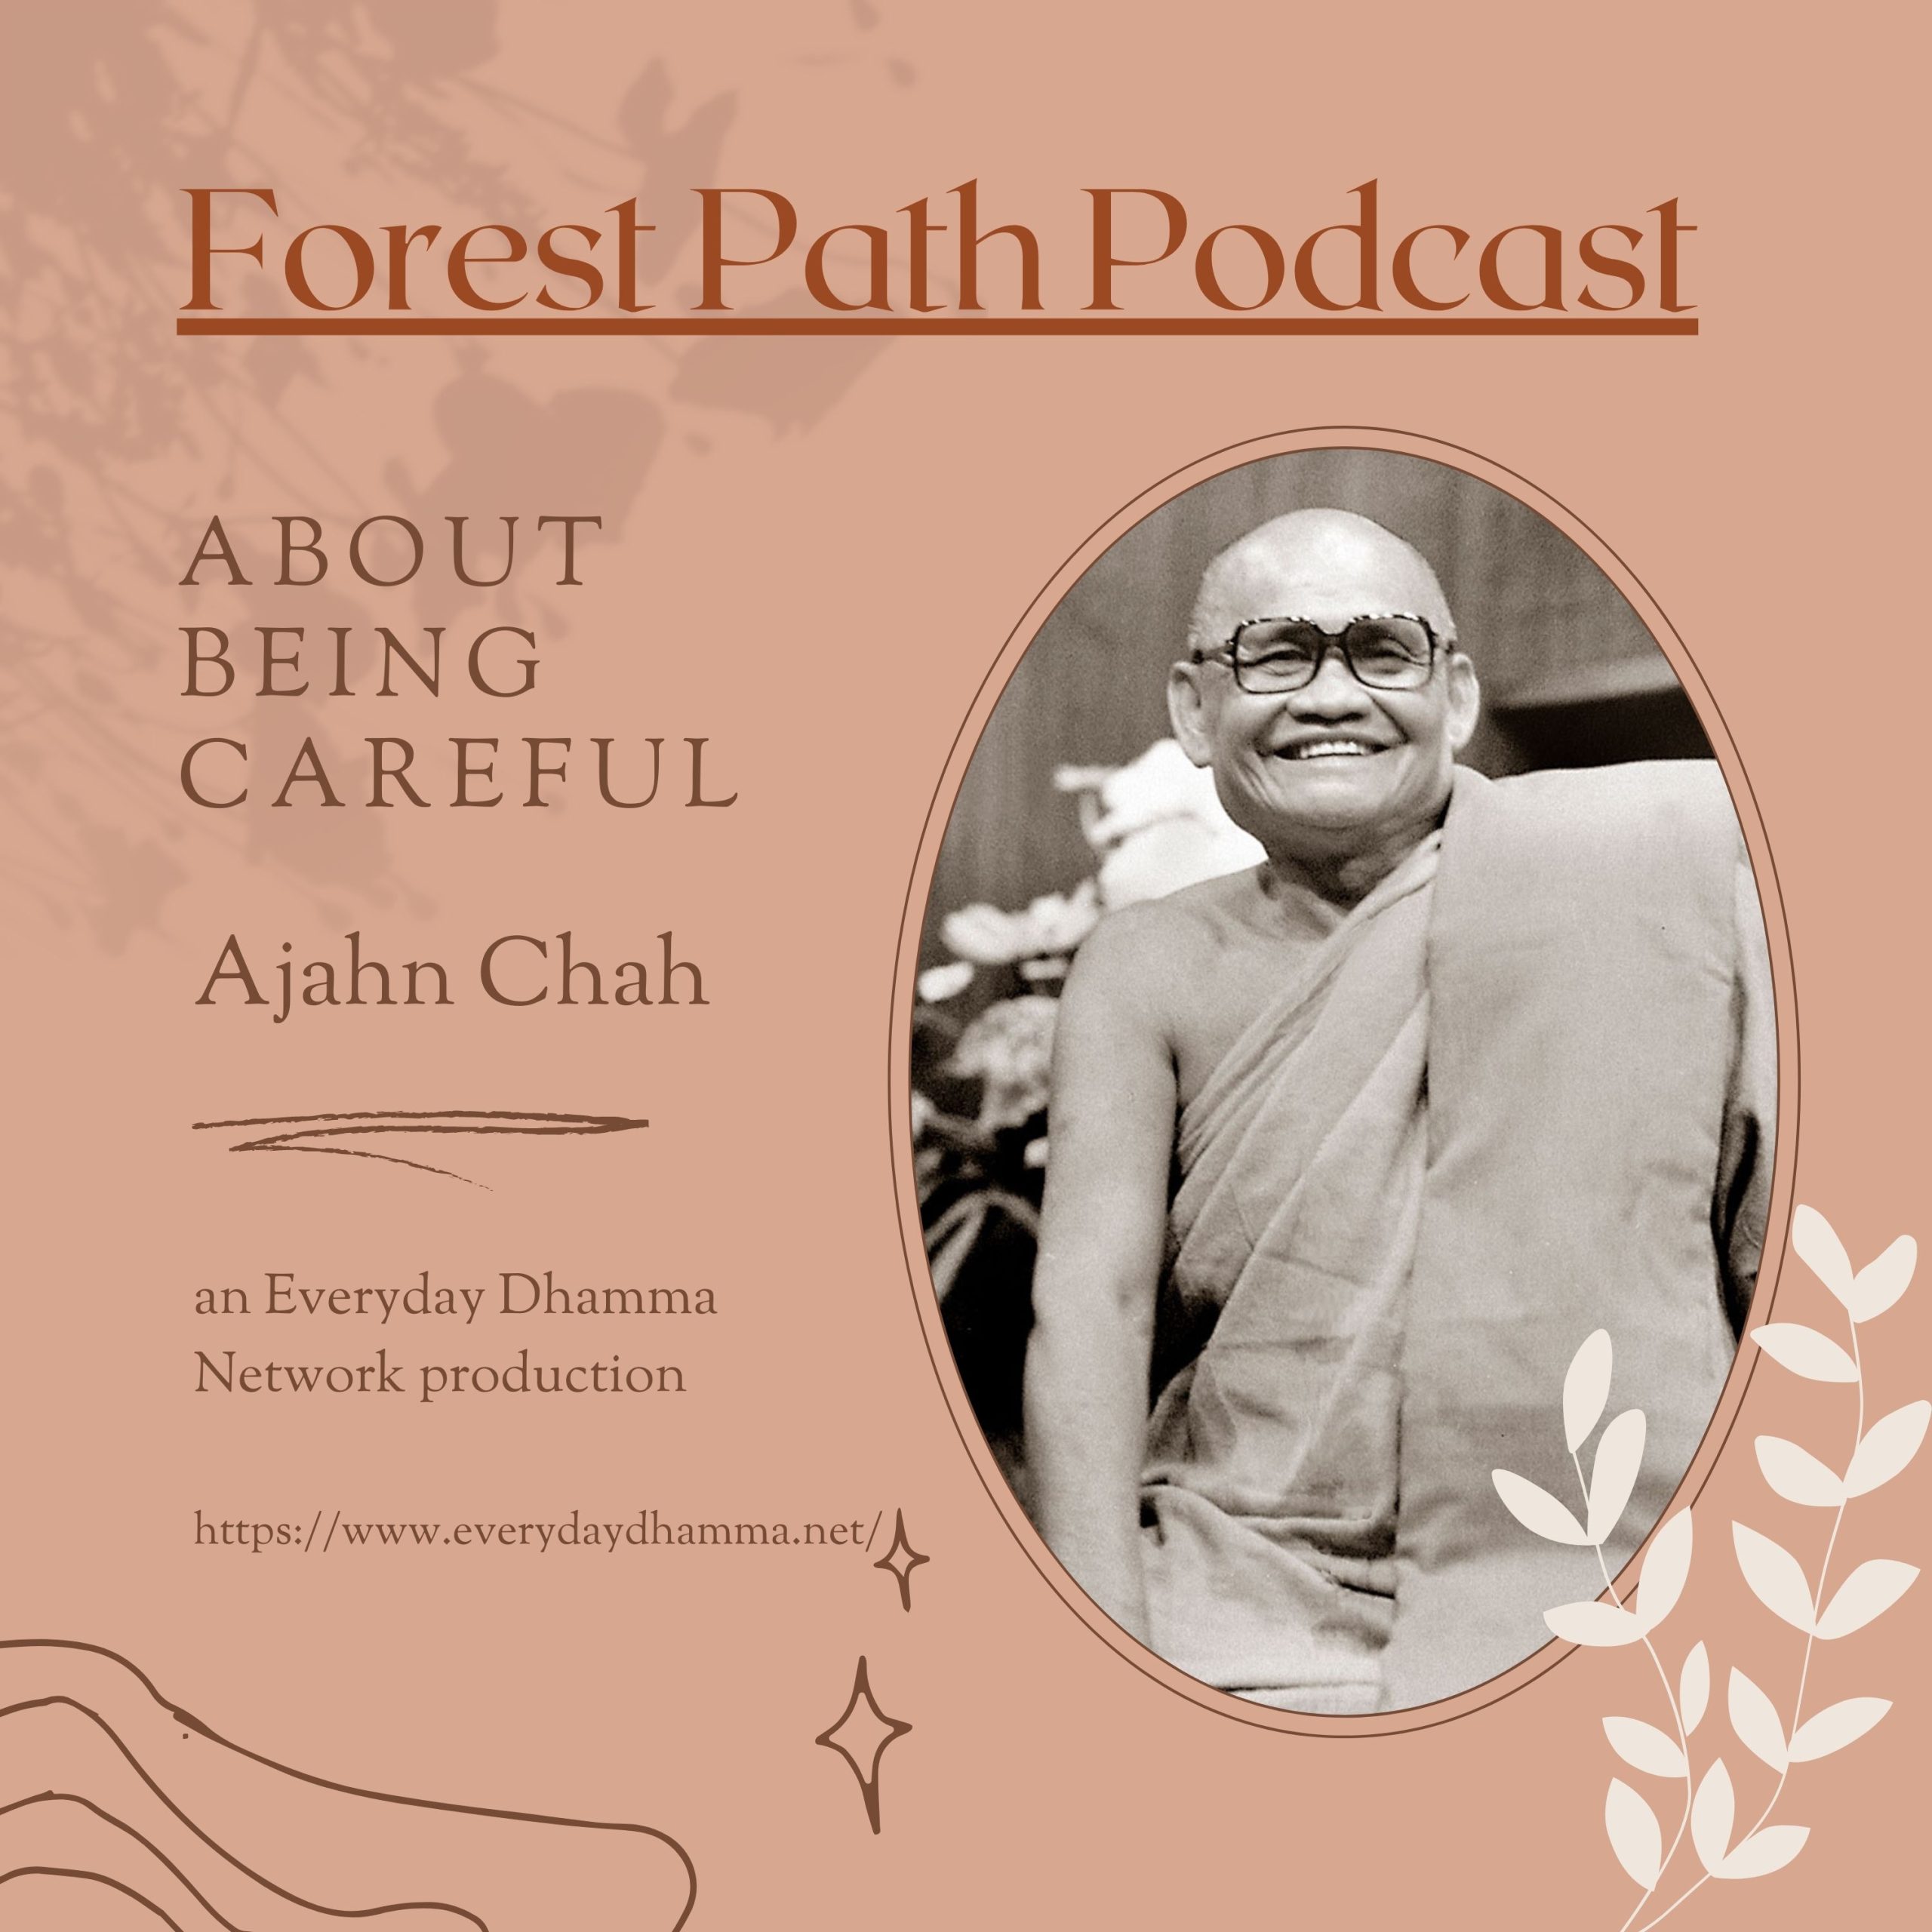 About Being Careful | Ajahn Chah